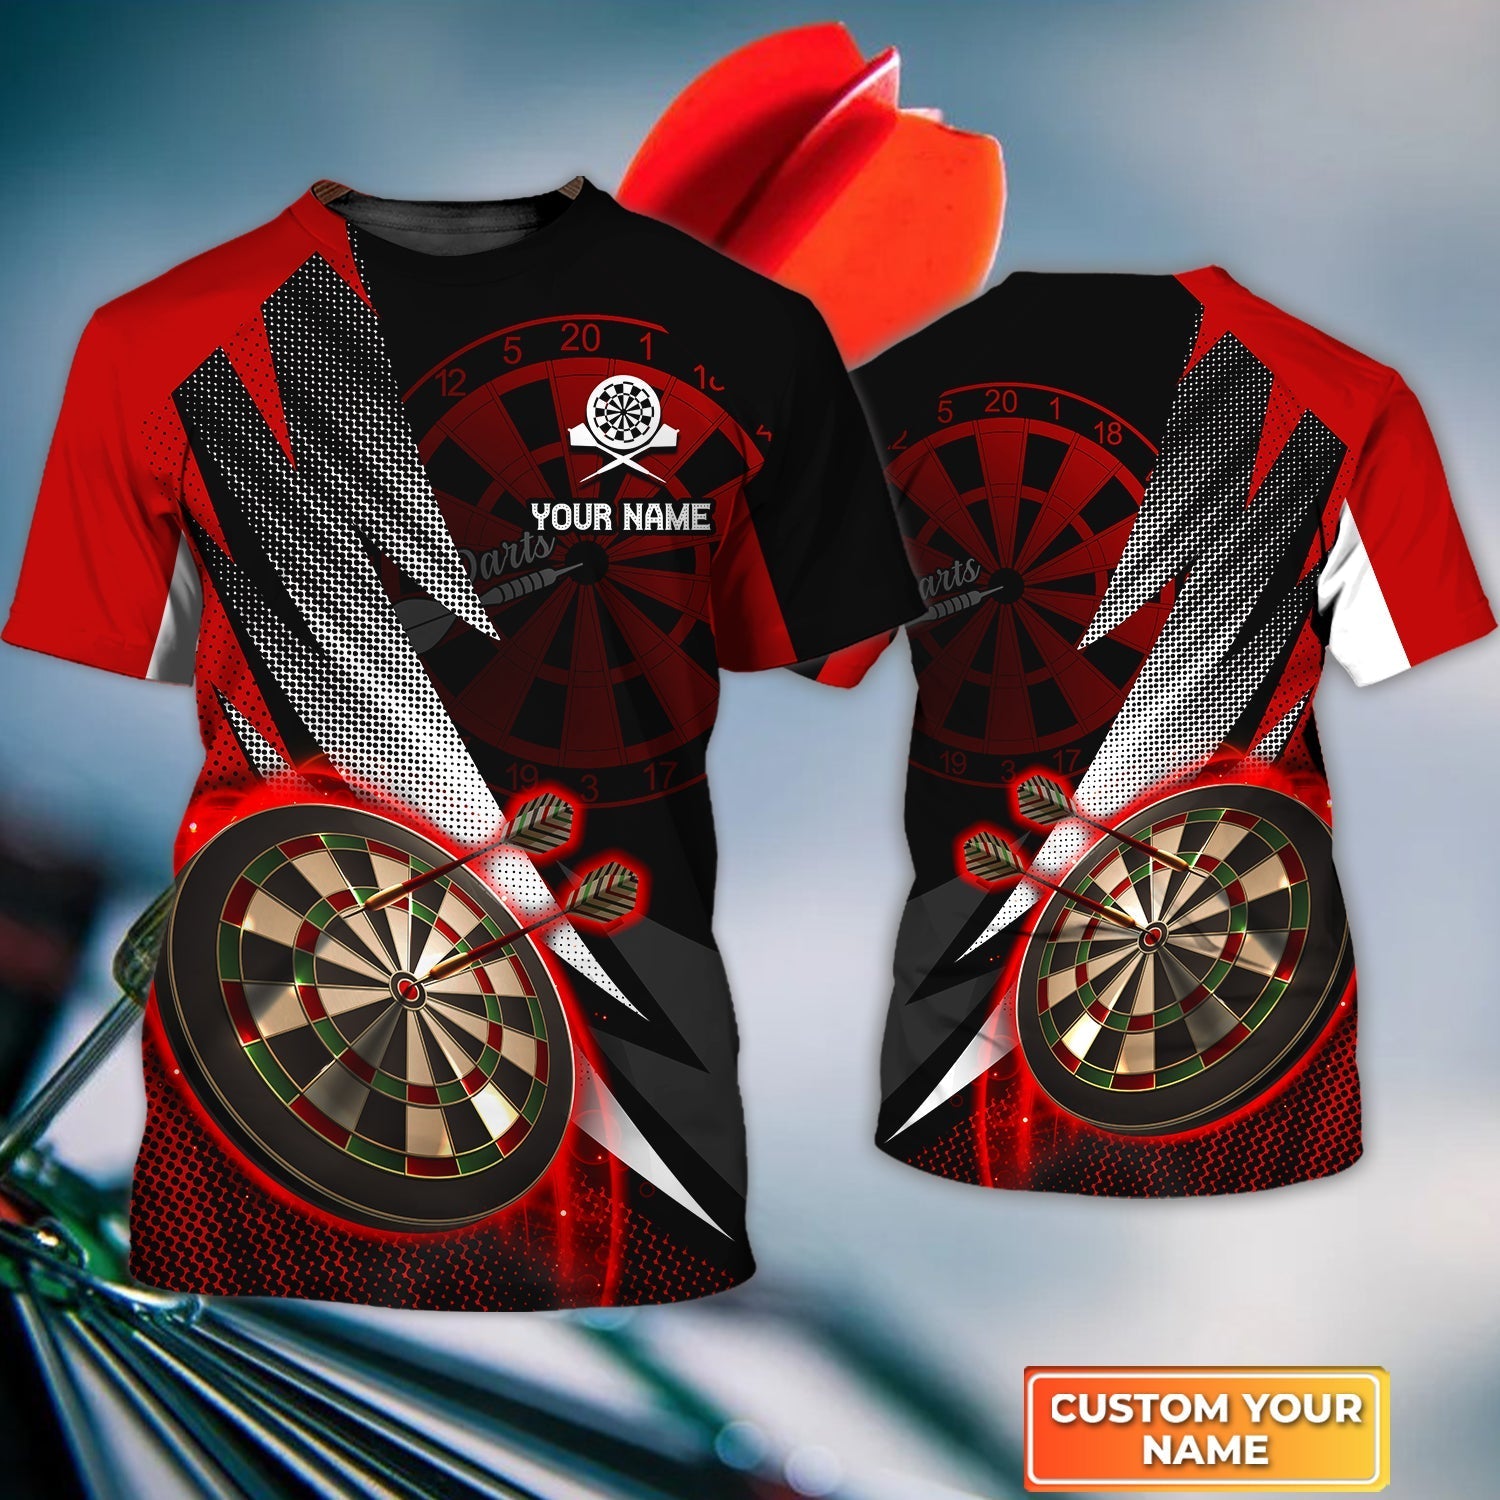 Turquoise Darts 3D all printed shirt for men, Personalized Name 3D Tshirt For Darts Player – DT109